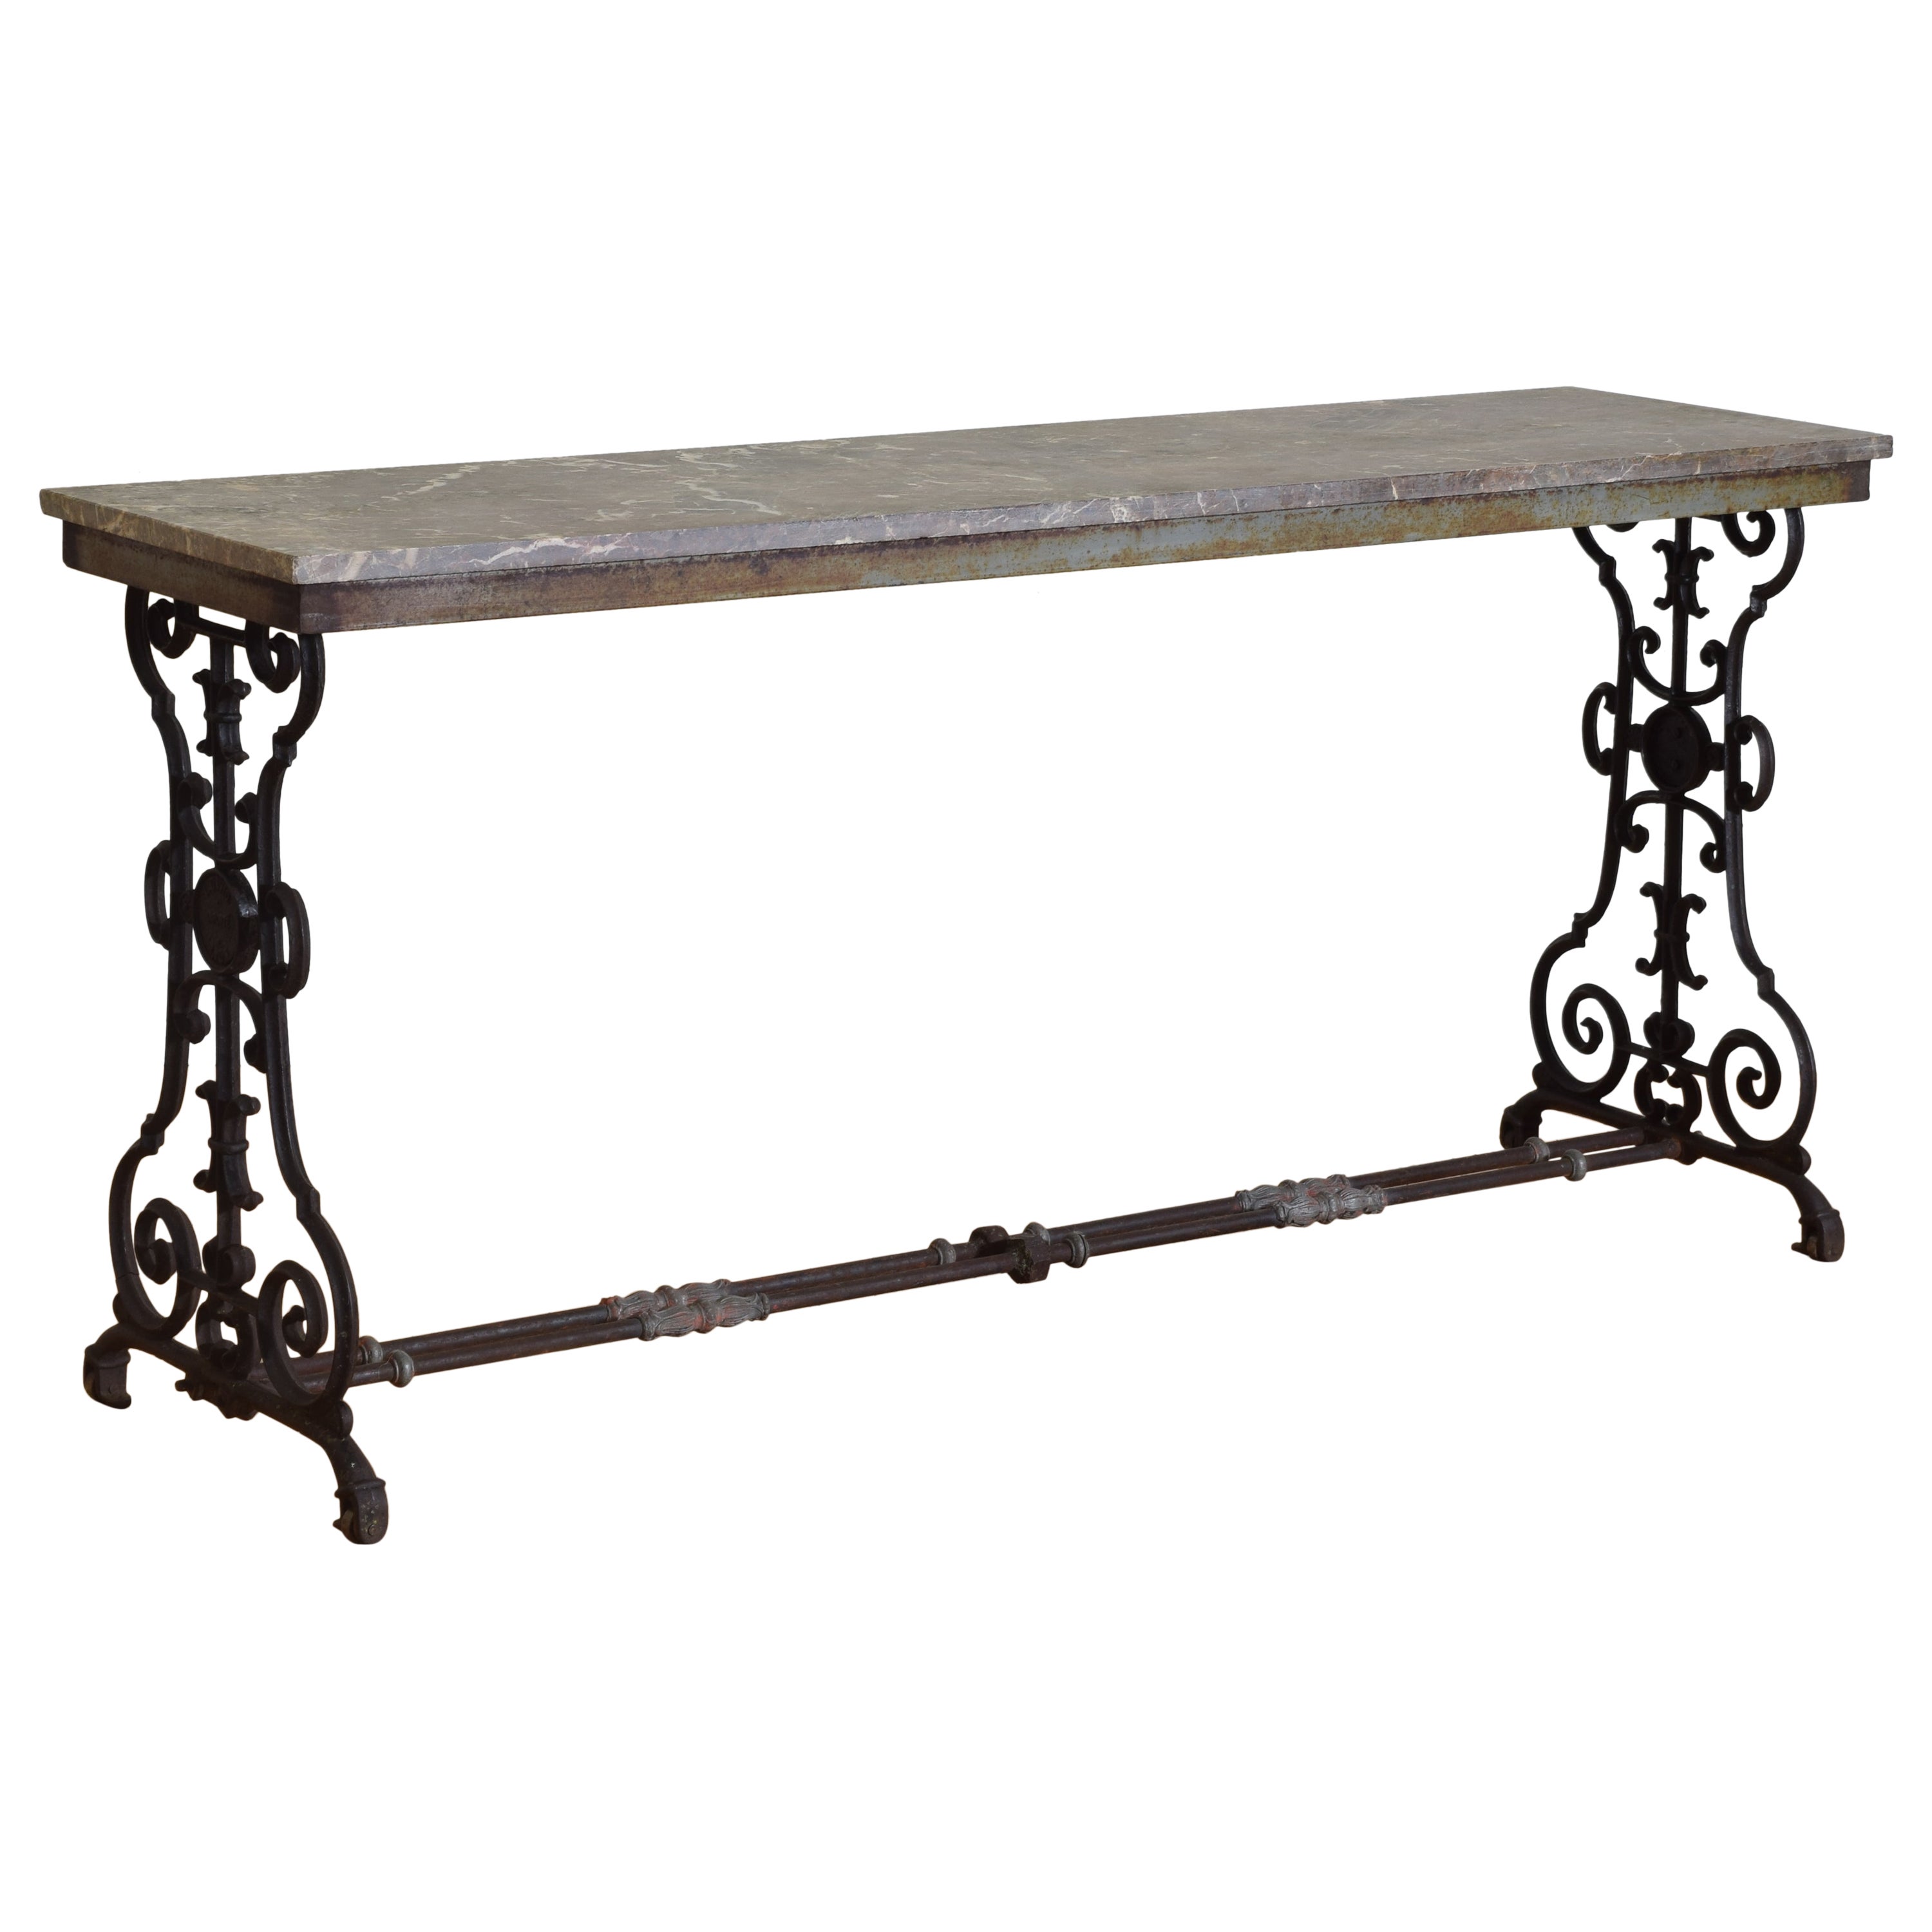 French Wrought Iron & Marble Garden Table, L. David, Lyon, 1st quarter 20th cen. For Sale